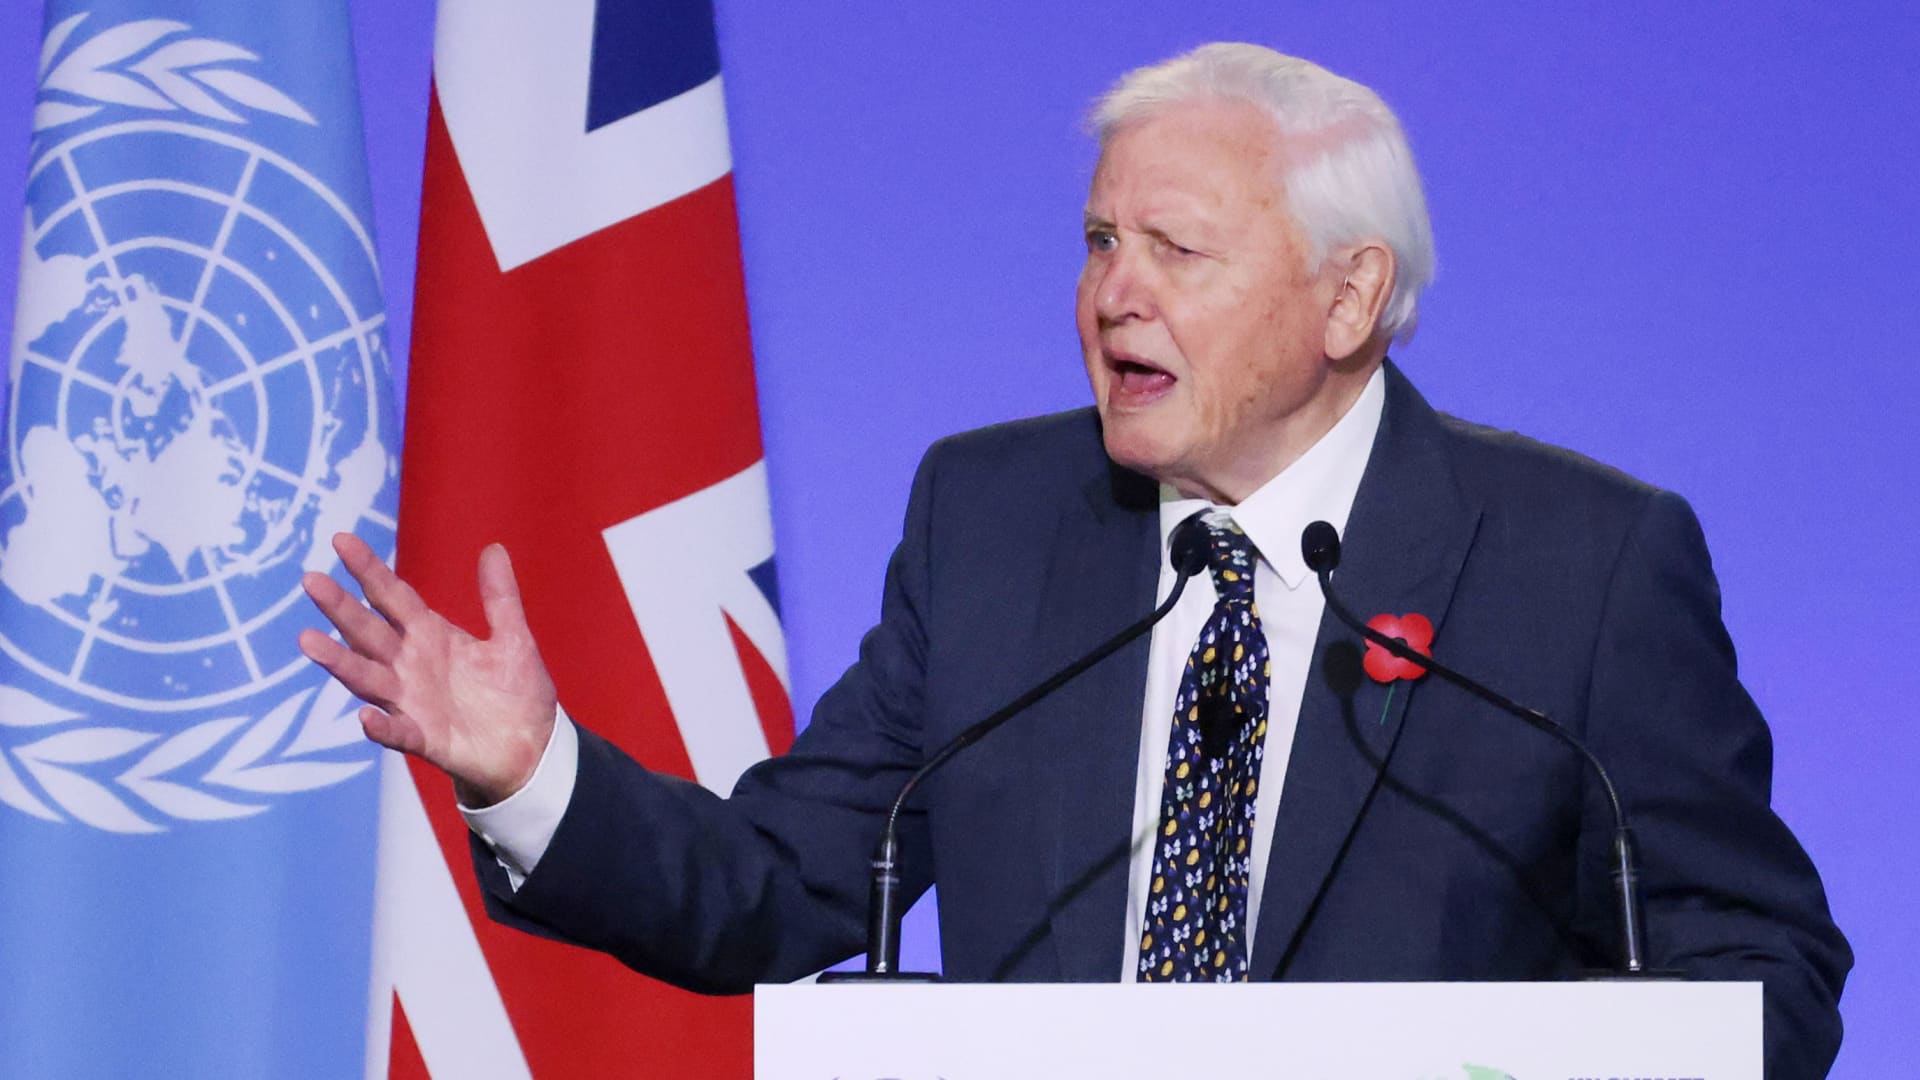 Sir David Attenborough delivers a speech during the opening ceremony of the UN Climate Change Conference (COP26) in Glasgow, Scotland, Britain, November 1, 2021.